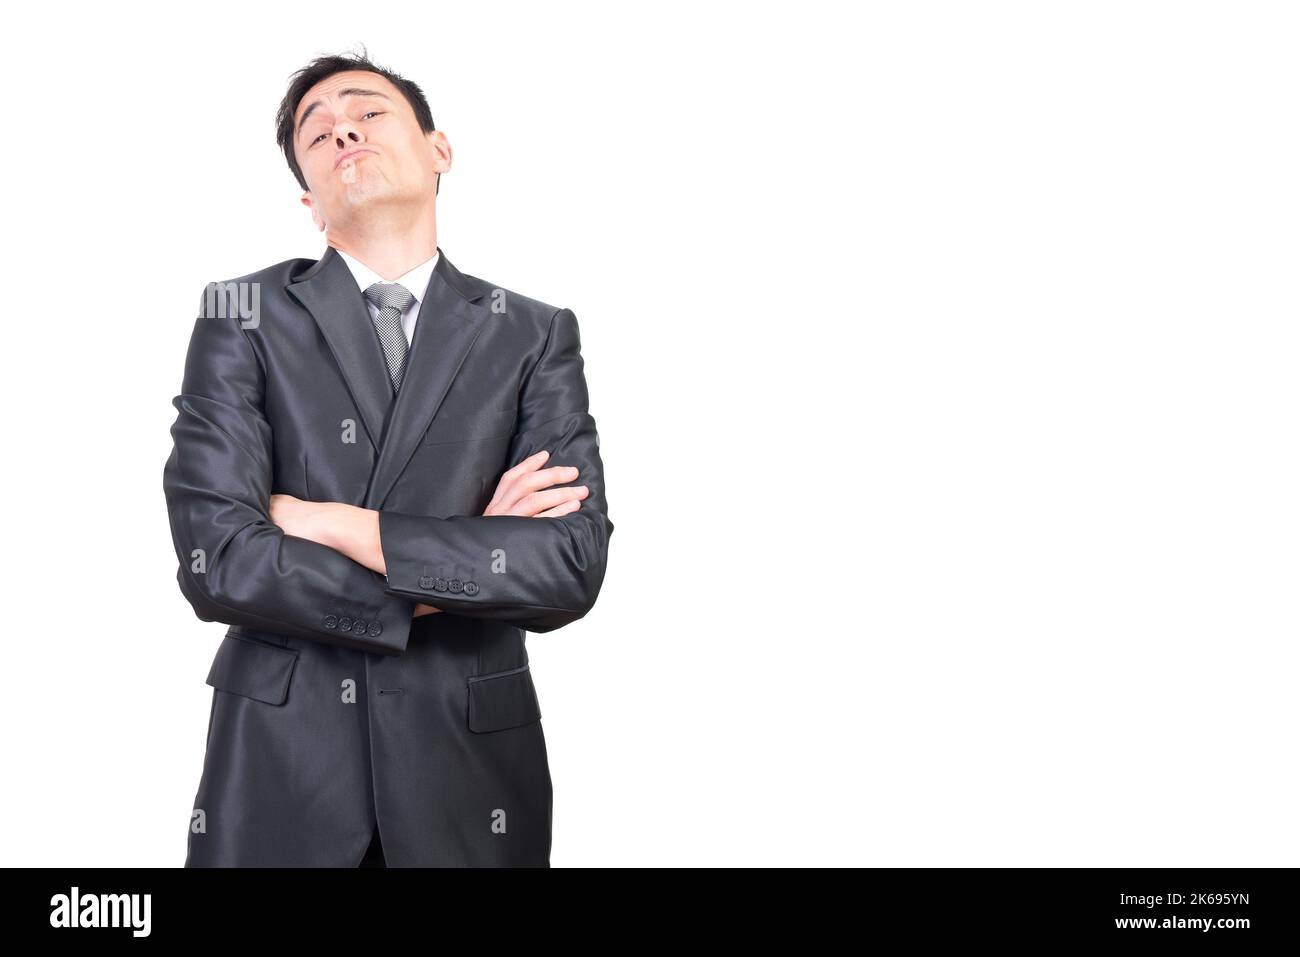 Self assured businessman with folded arms looking at camera Stock Photo